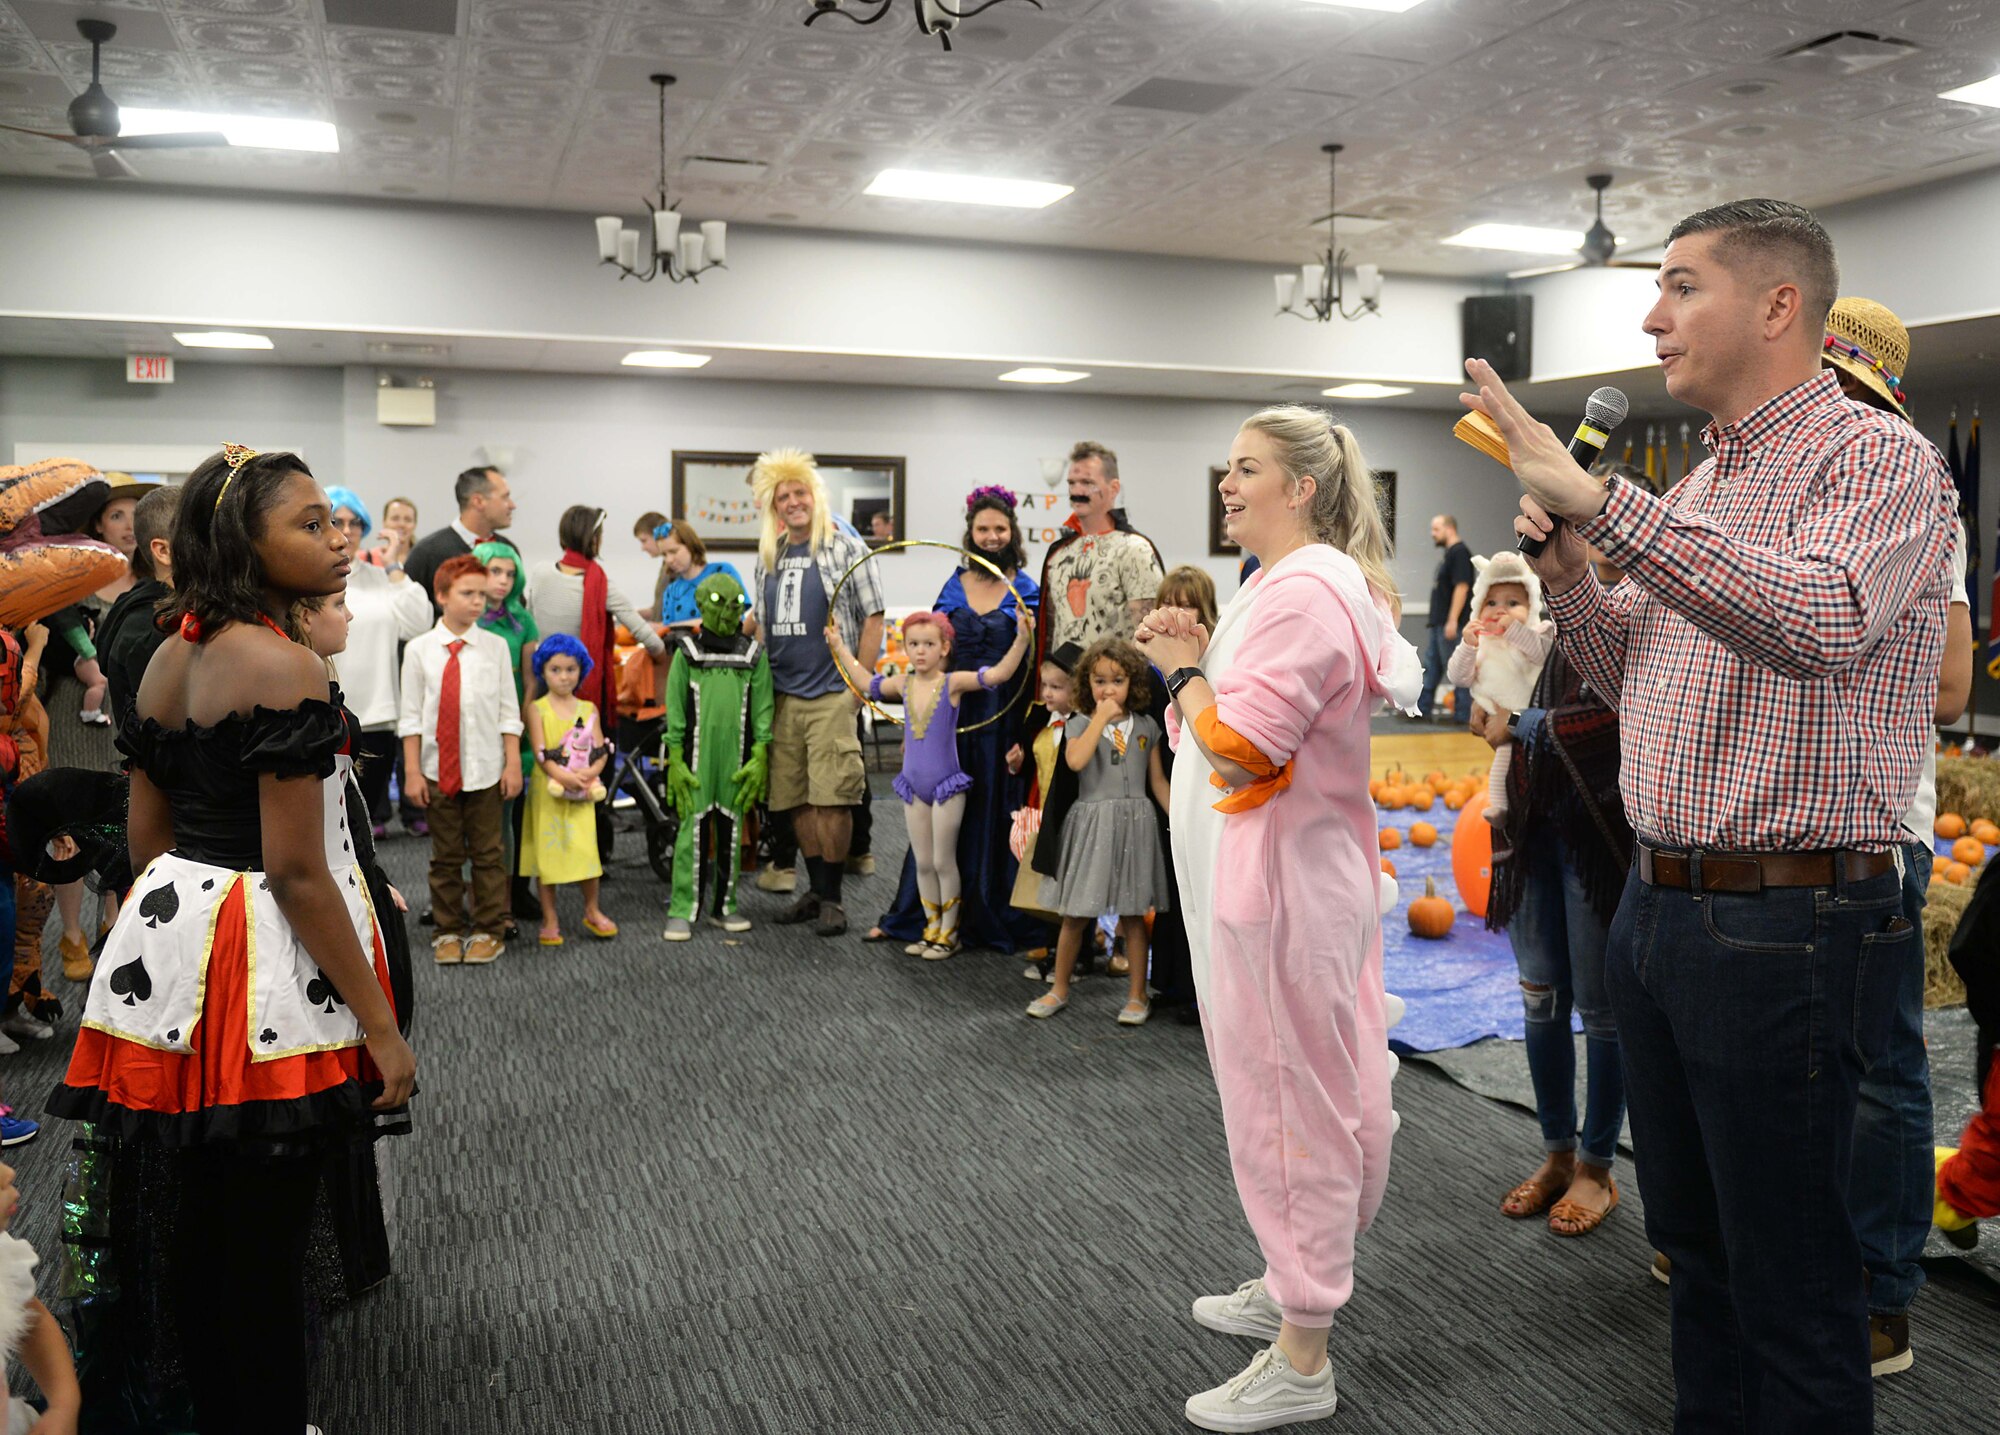 Col. David Fazenbaker, 14th Flying Training Wing vice commander, introduces one set of participants in a costume contest during Boo Fest at the Club Oct. 26, 2019, on Columbus Air Force Base, Miss. Halloween is the second highest grossing commercial holiday after Christmas. (U.S. Air Force photo by Airman 1st Class Hannah Bean)